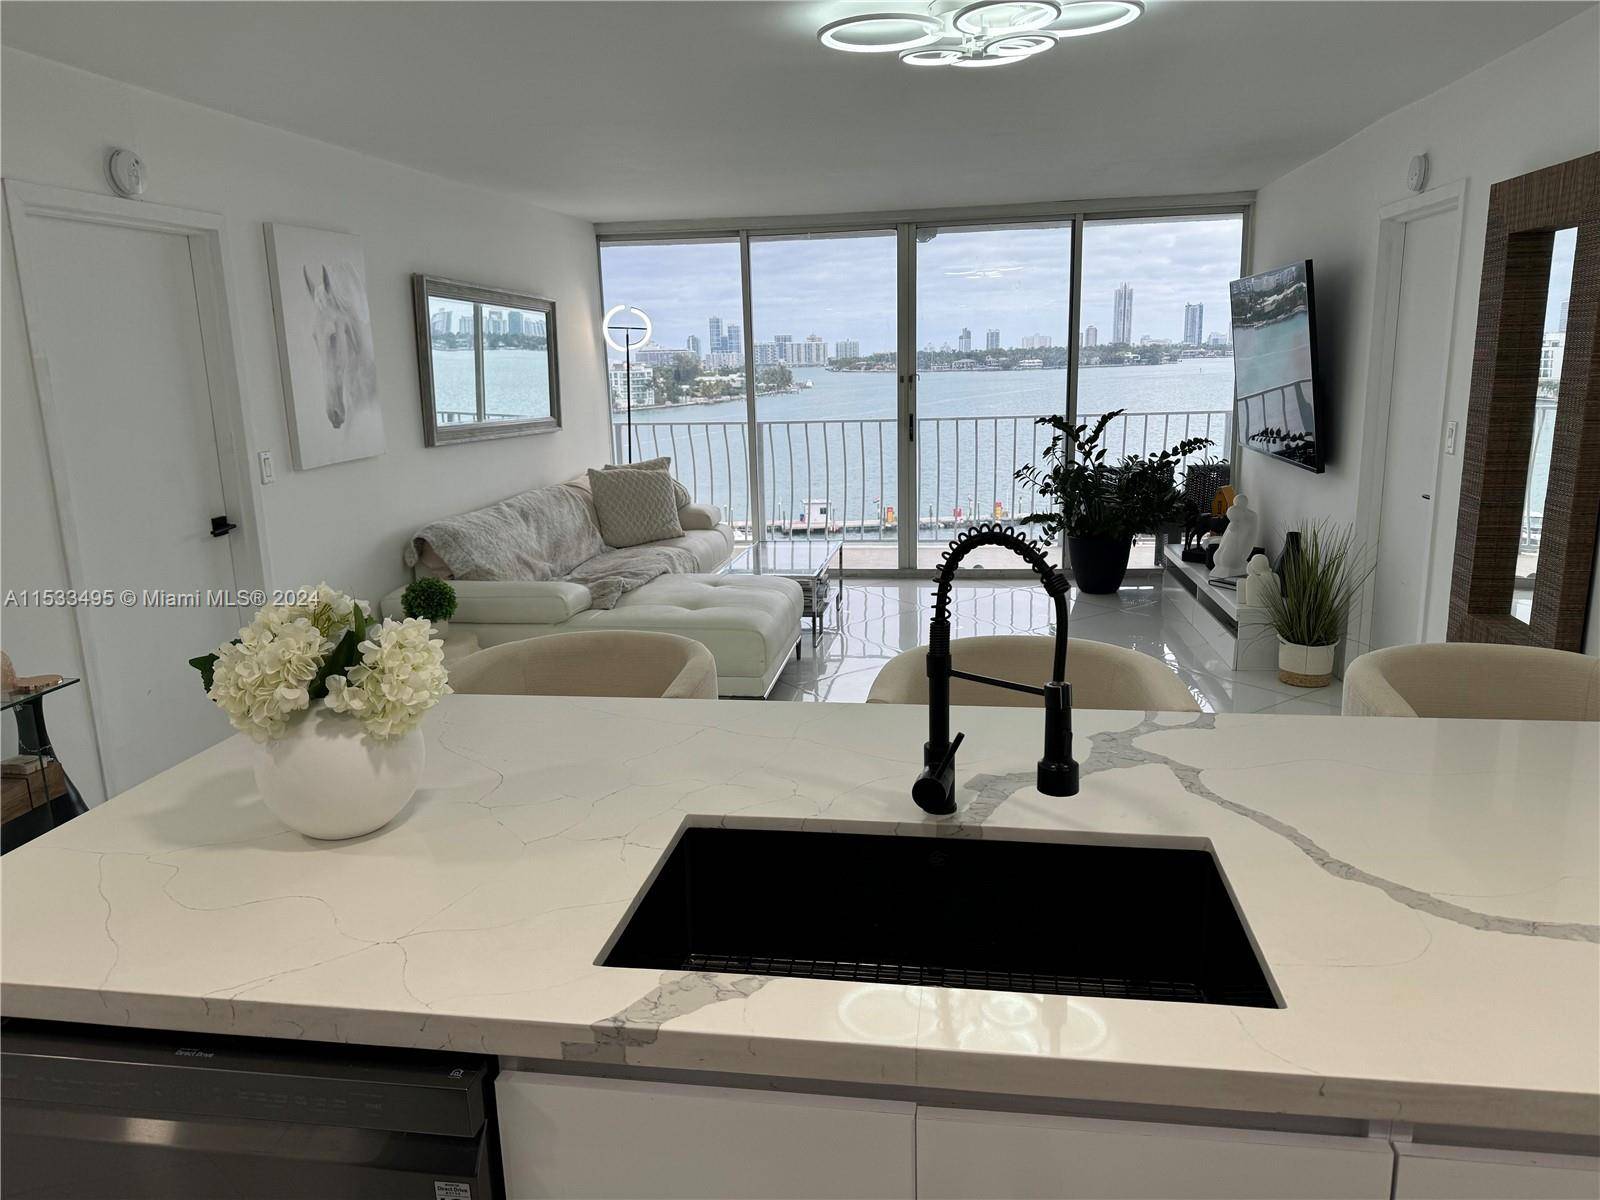 Discover waterfront living at its finest in North Bay Village with this stunning two bedroom, two full bath unit, boasting a complete remodel.